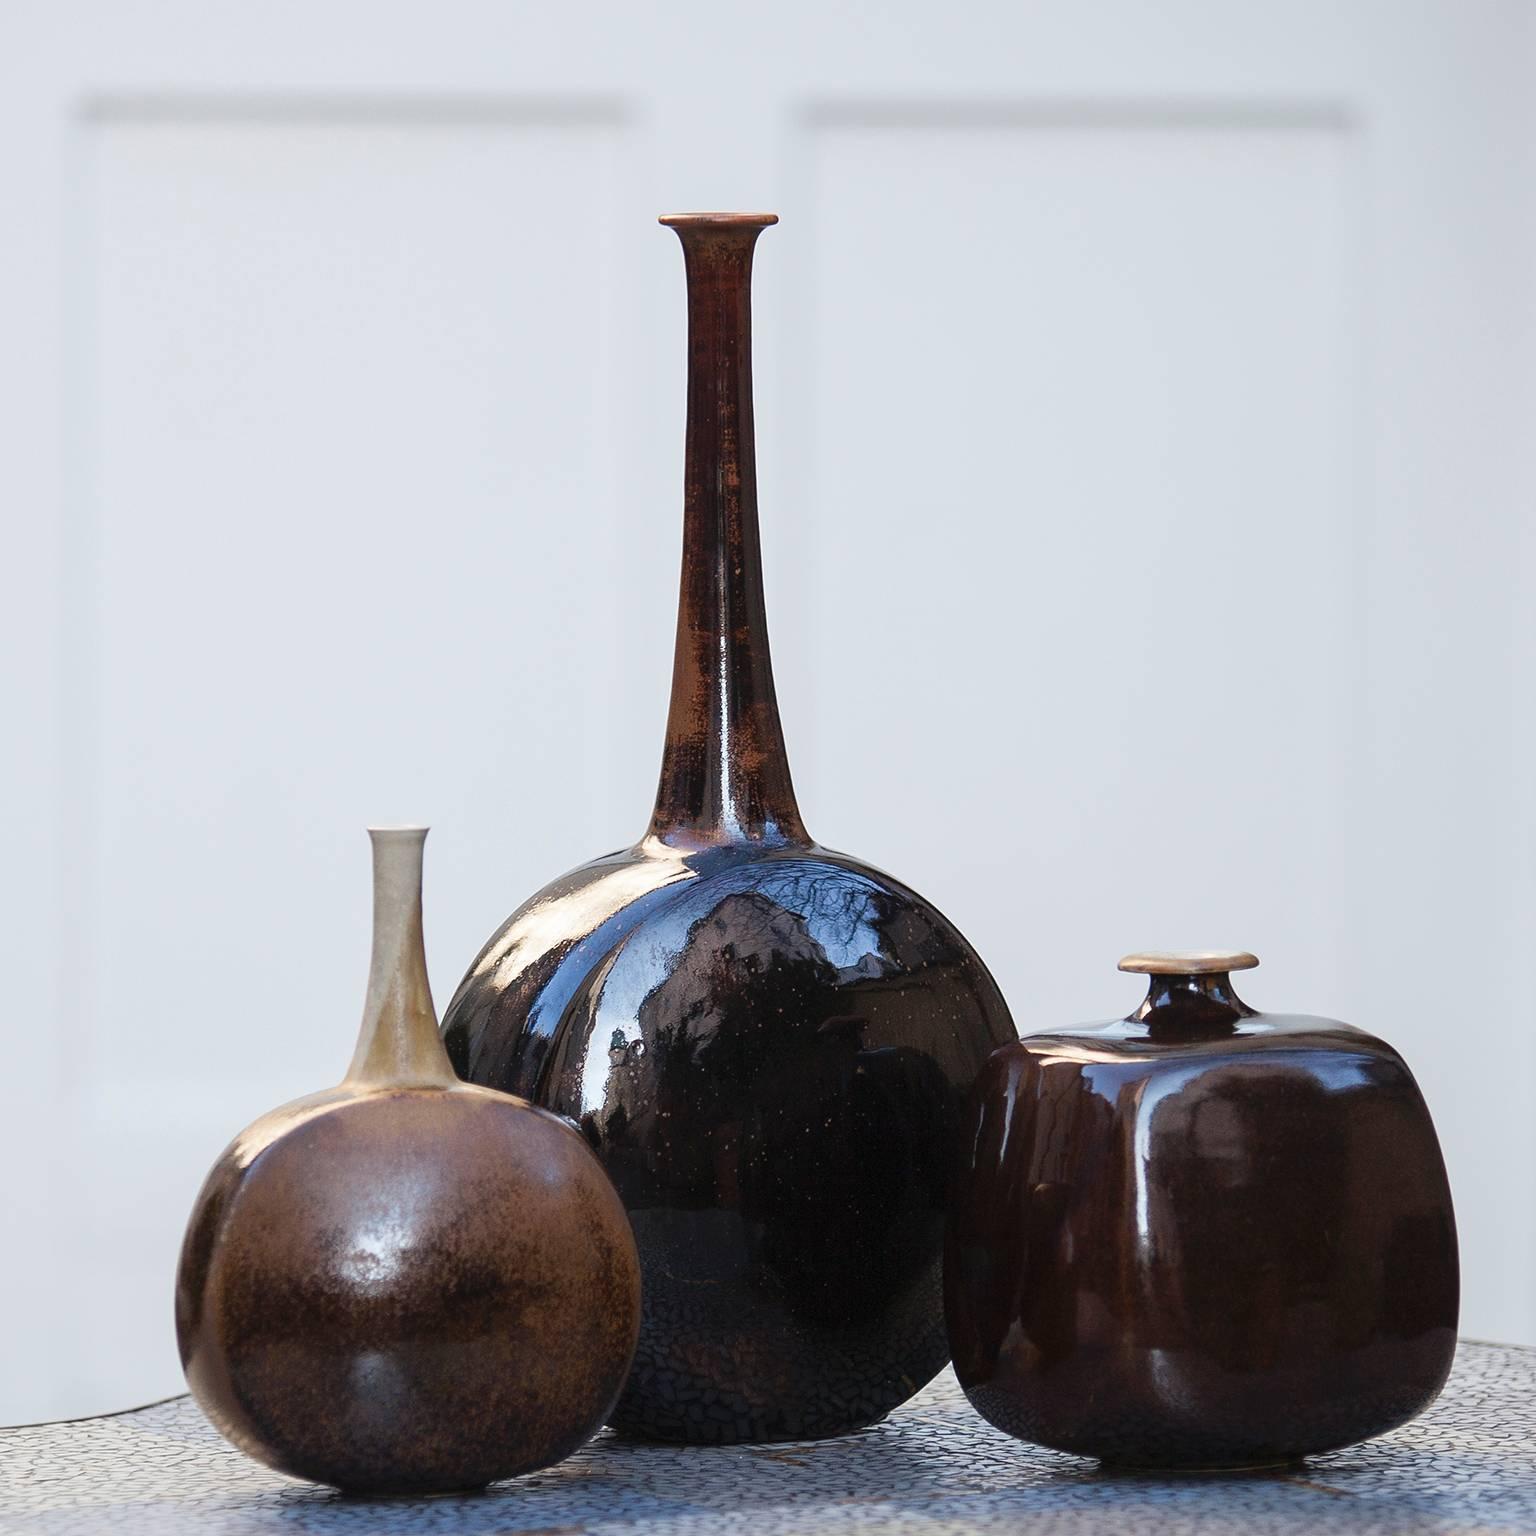 Beautiful set of three art pottery vases in brown glazed ceramic from 1970s by Gerald and Gotlind Weigel, Germany.
Measures: H 44 x W 23 x 14 cm H 18 x D 19 cm H 23 x D 17 cm.
Gerald Weigel, born in 1925, grew up in Thuringen where, like his